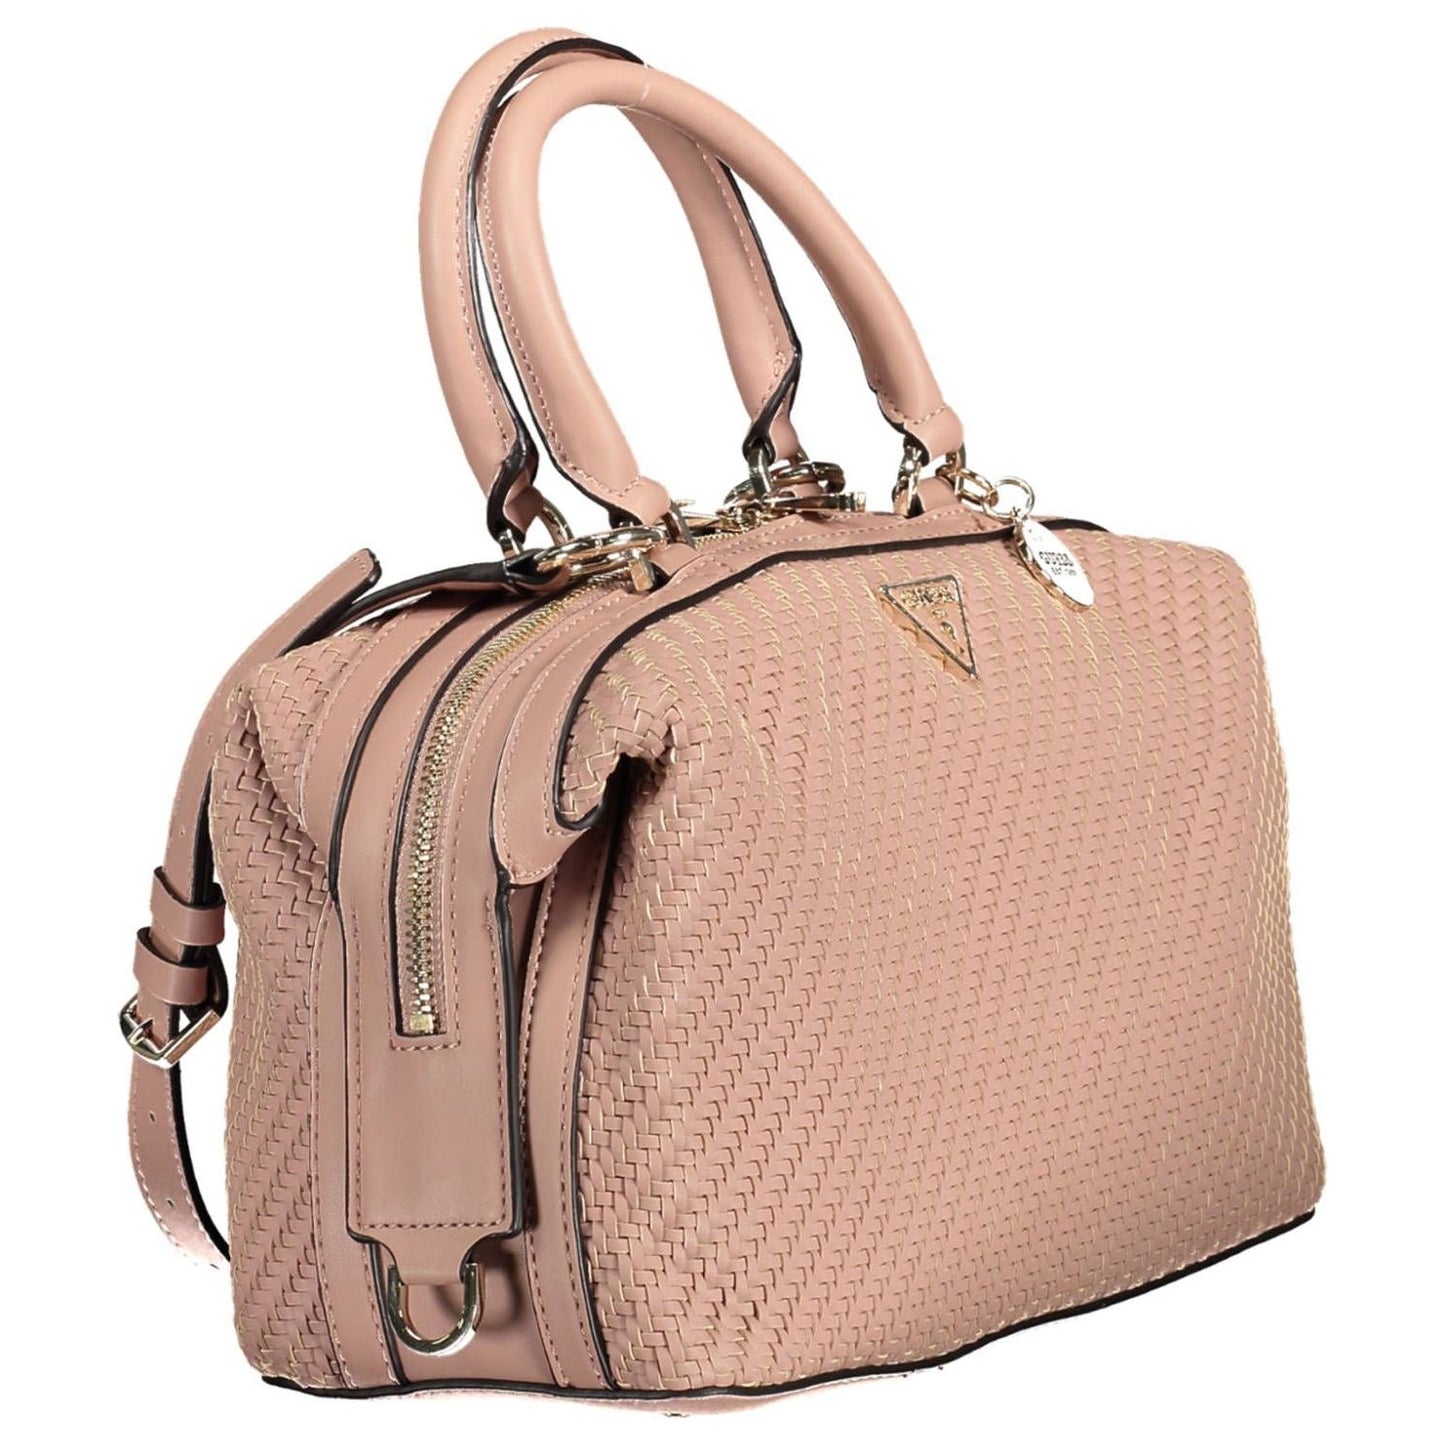 Guess Jeans Chic Pink Satchel with Contrasting Details chic-pink-satchel-with-contrasting-details